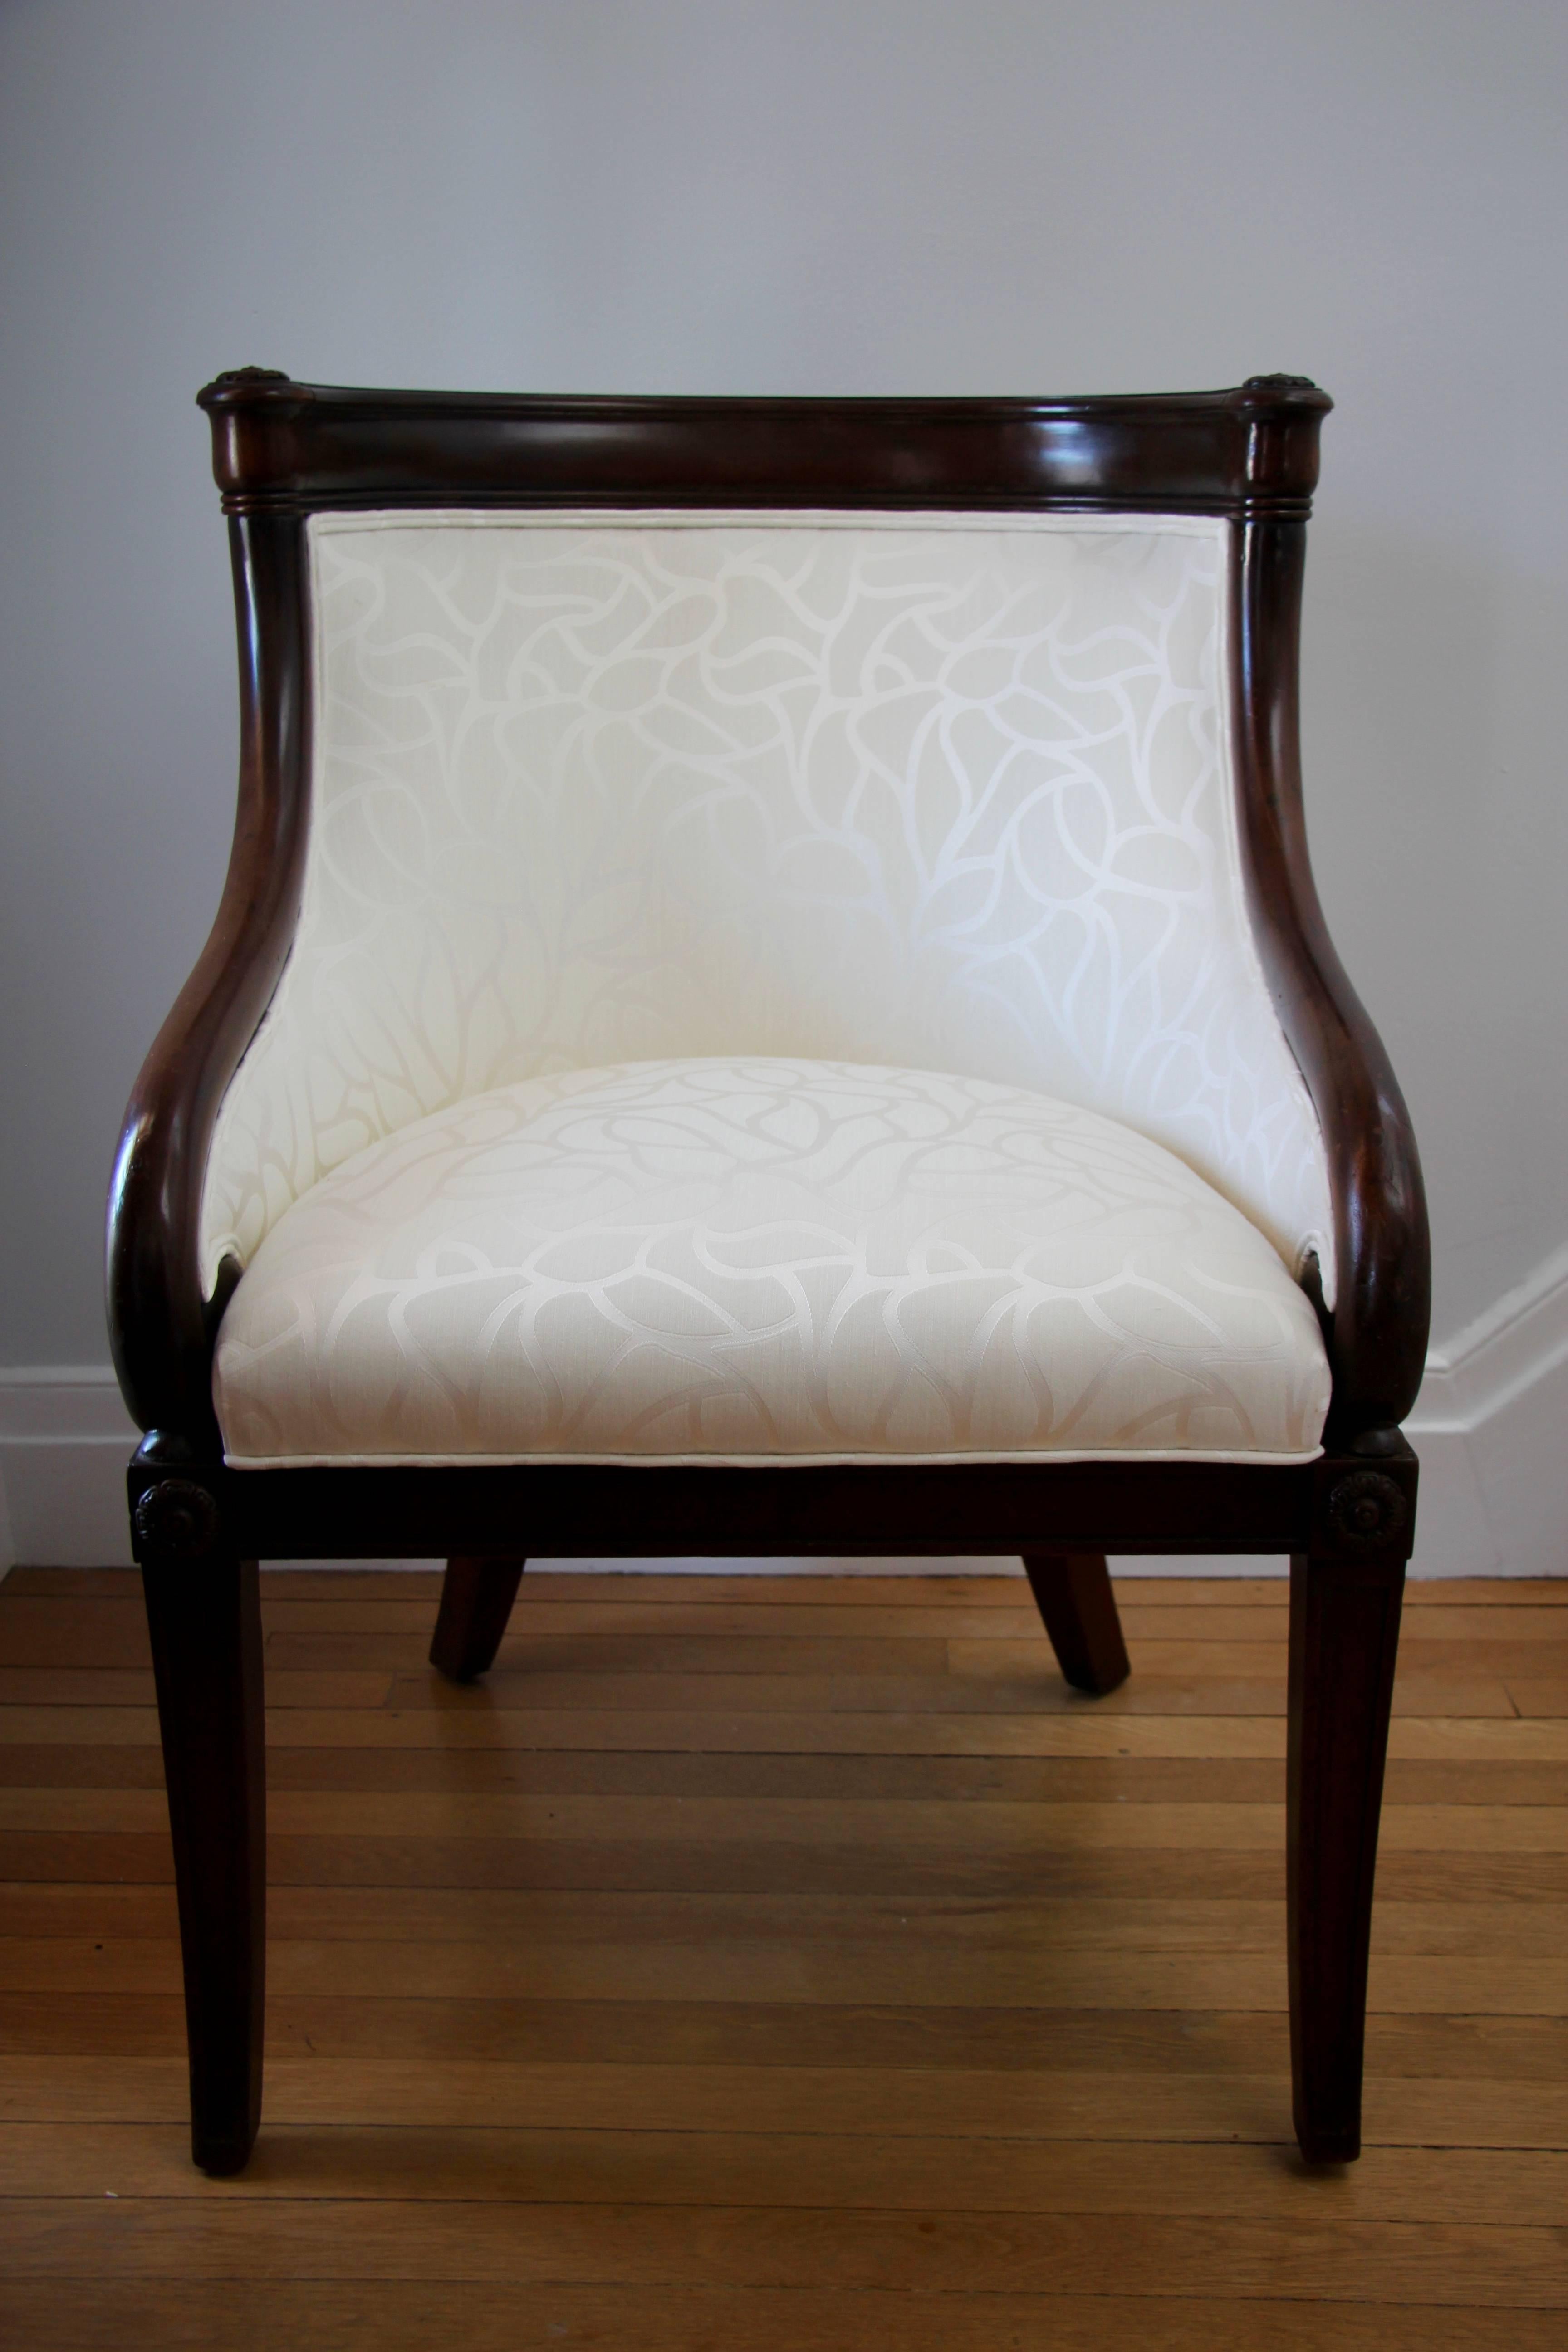 Unique Empire tub armchair, circa 1820, mahogany with finely carved details. Newly upholstered with beautiful crème colored fabric.